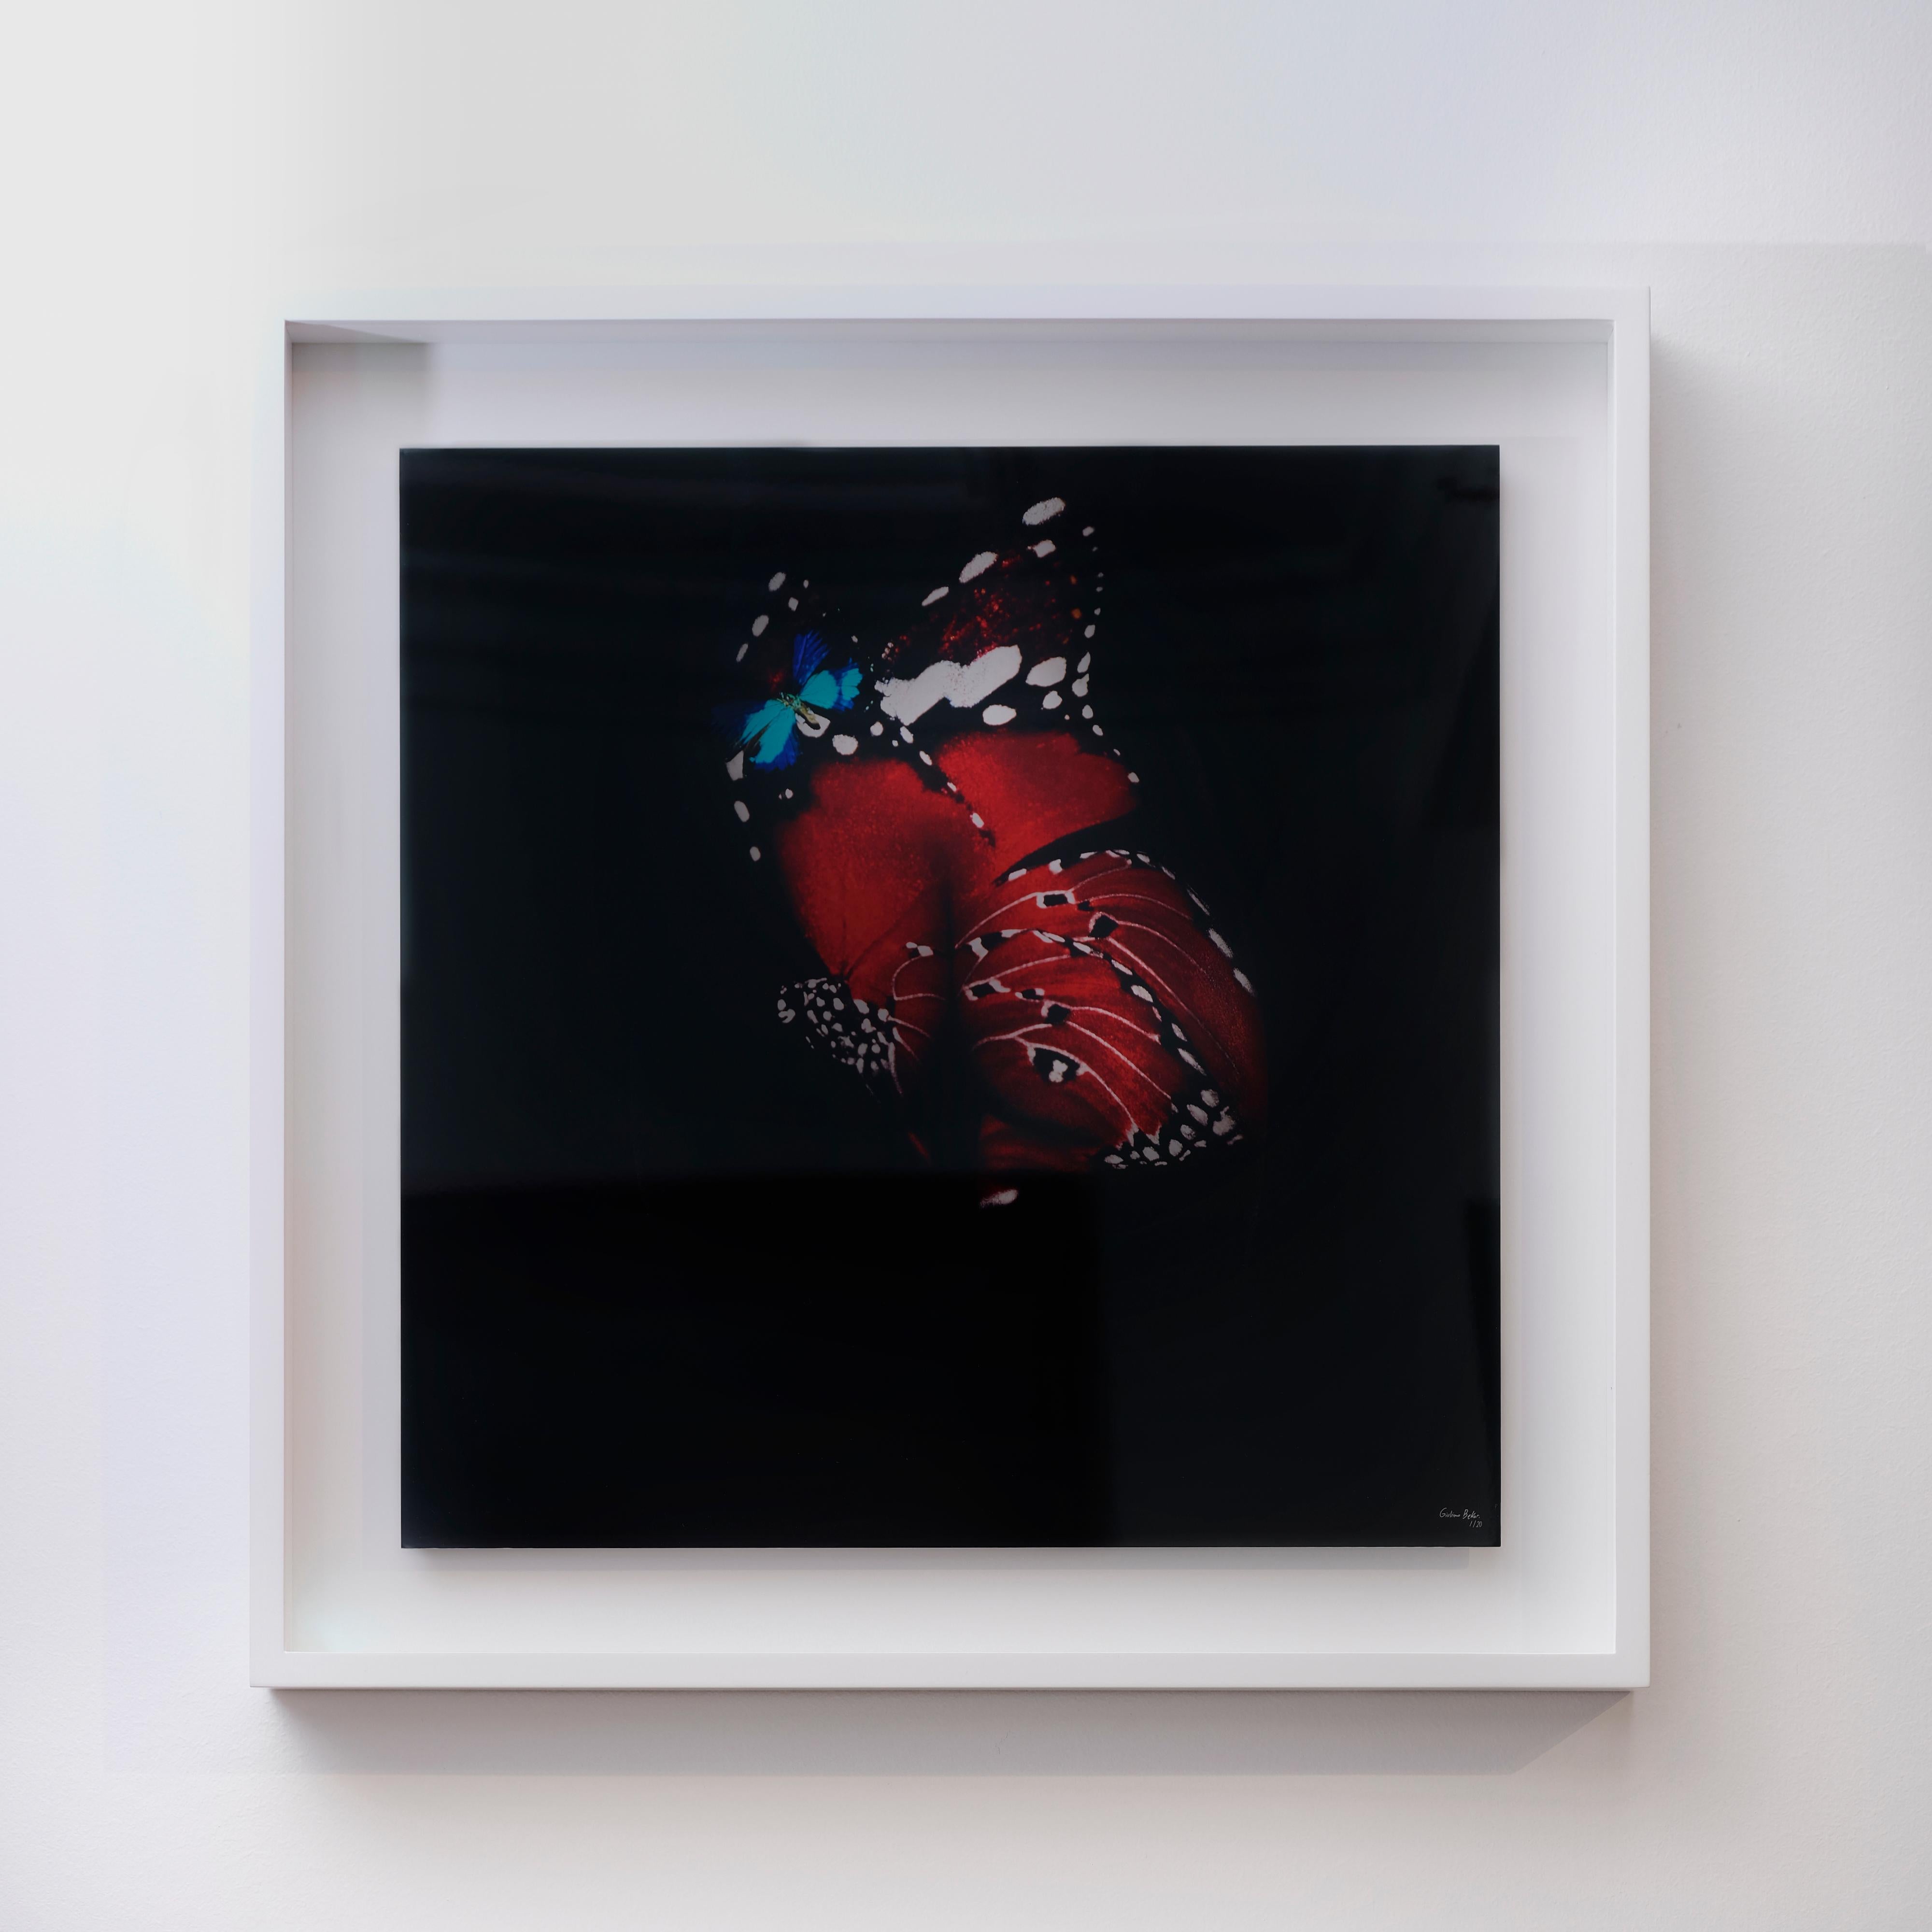 "Butterfly 12" (FRAMED) Photography 16" x 16" in Edition 1/20 by Giuliano Bekor